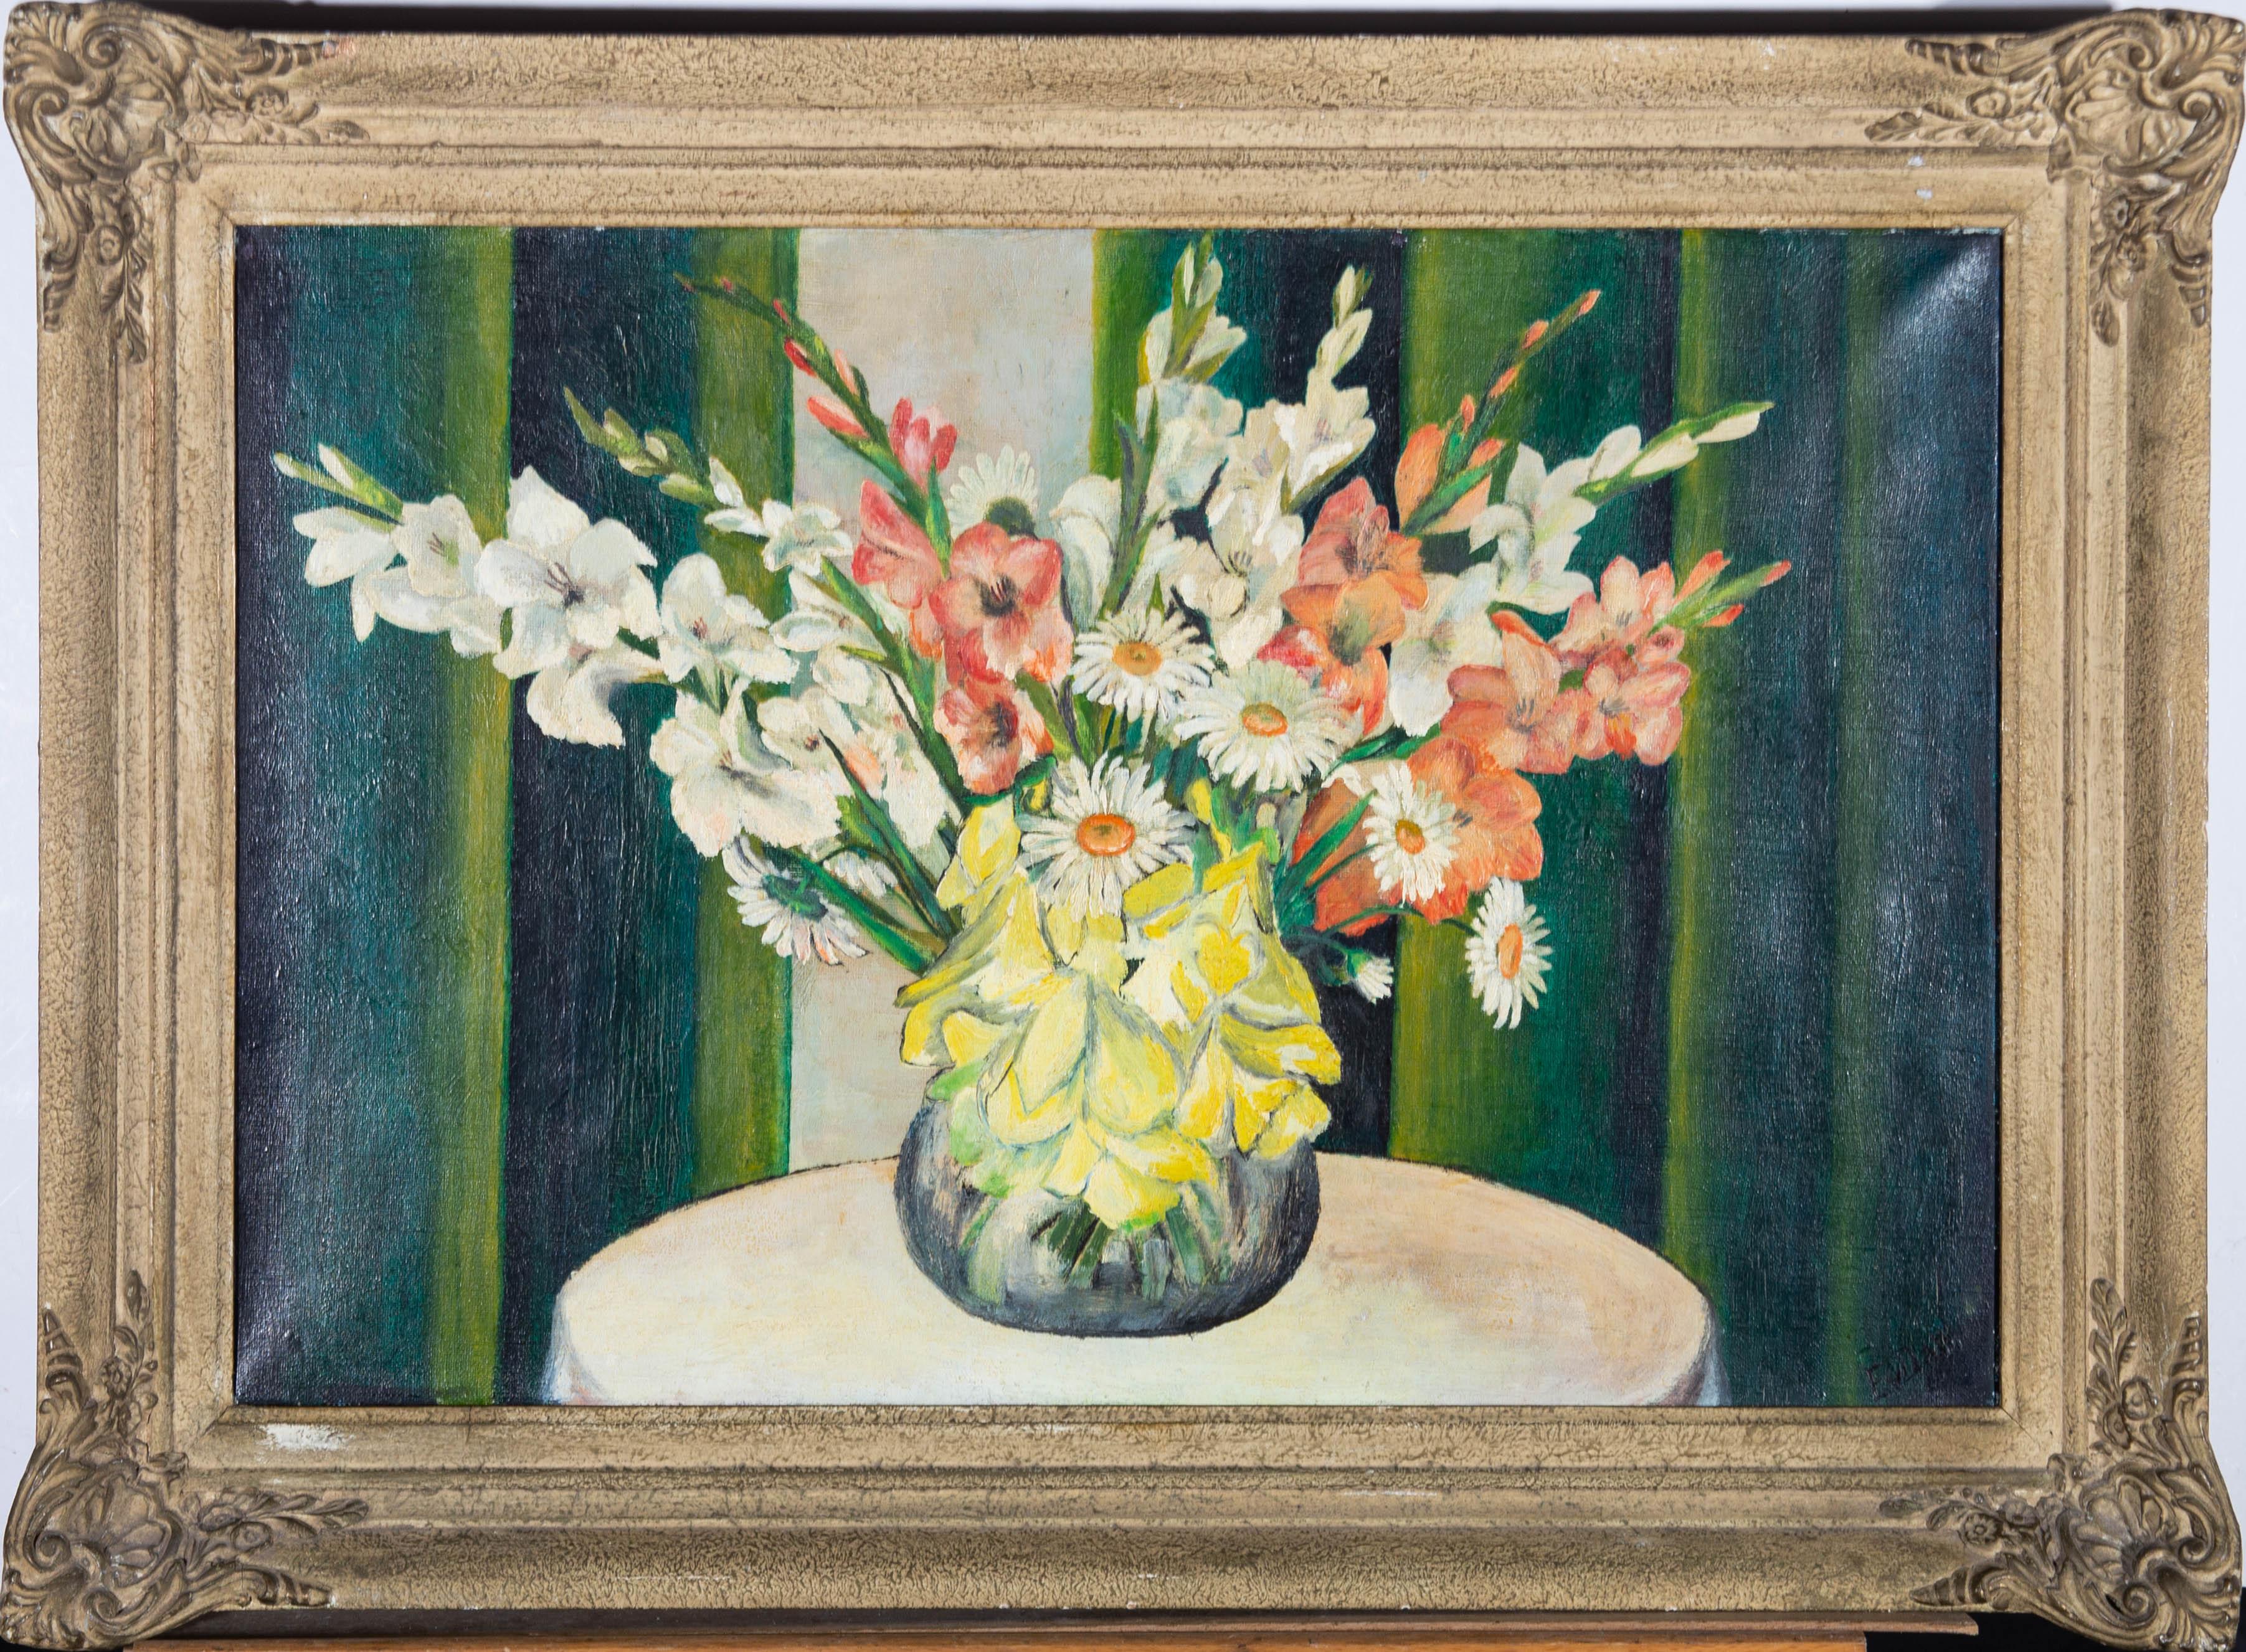 A bright and jolly mid Century Dutch School still life of gladioli and daisies against a zingy green backdrop. The artist has signed to the lower right and the painting has been presented in a mid Century frame with foliate corners. There is an